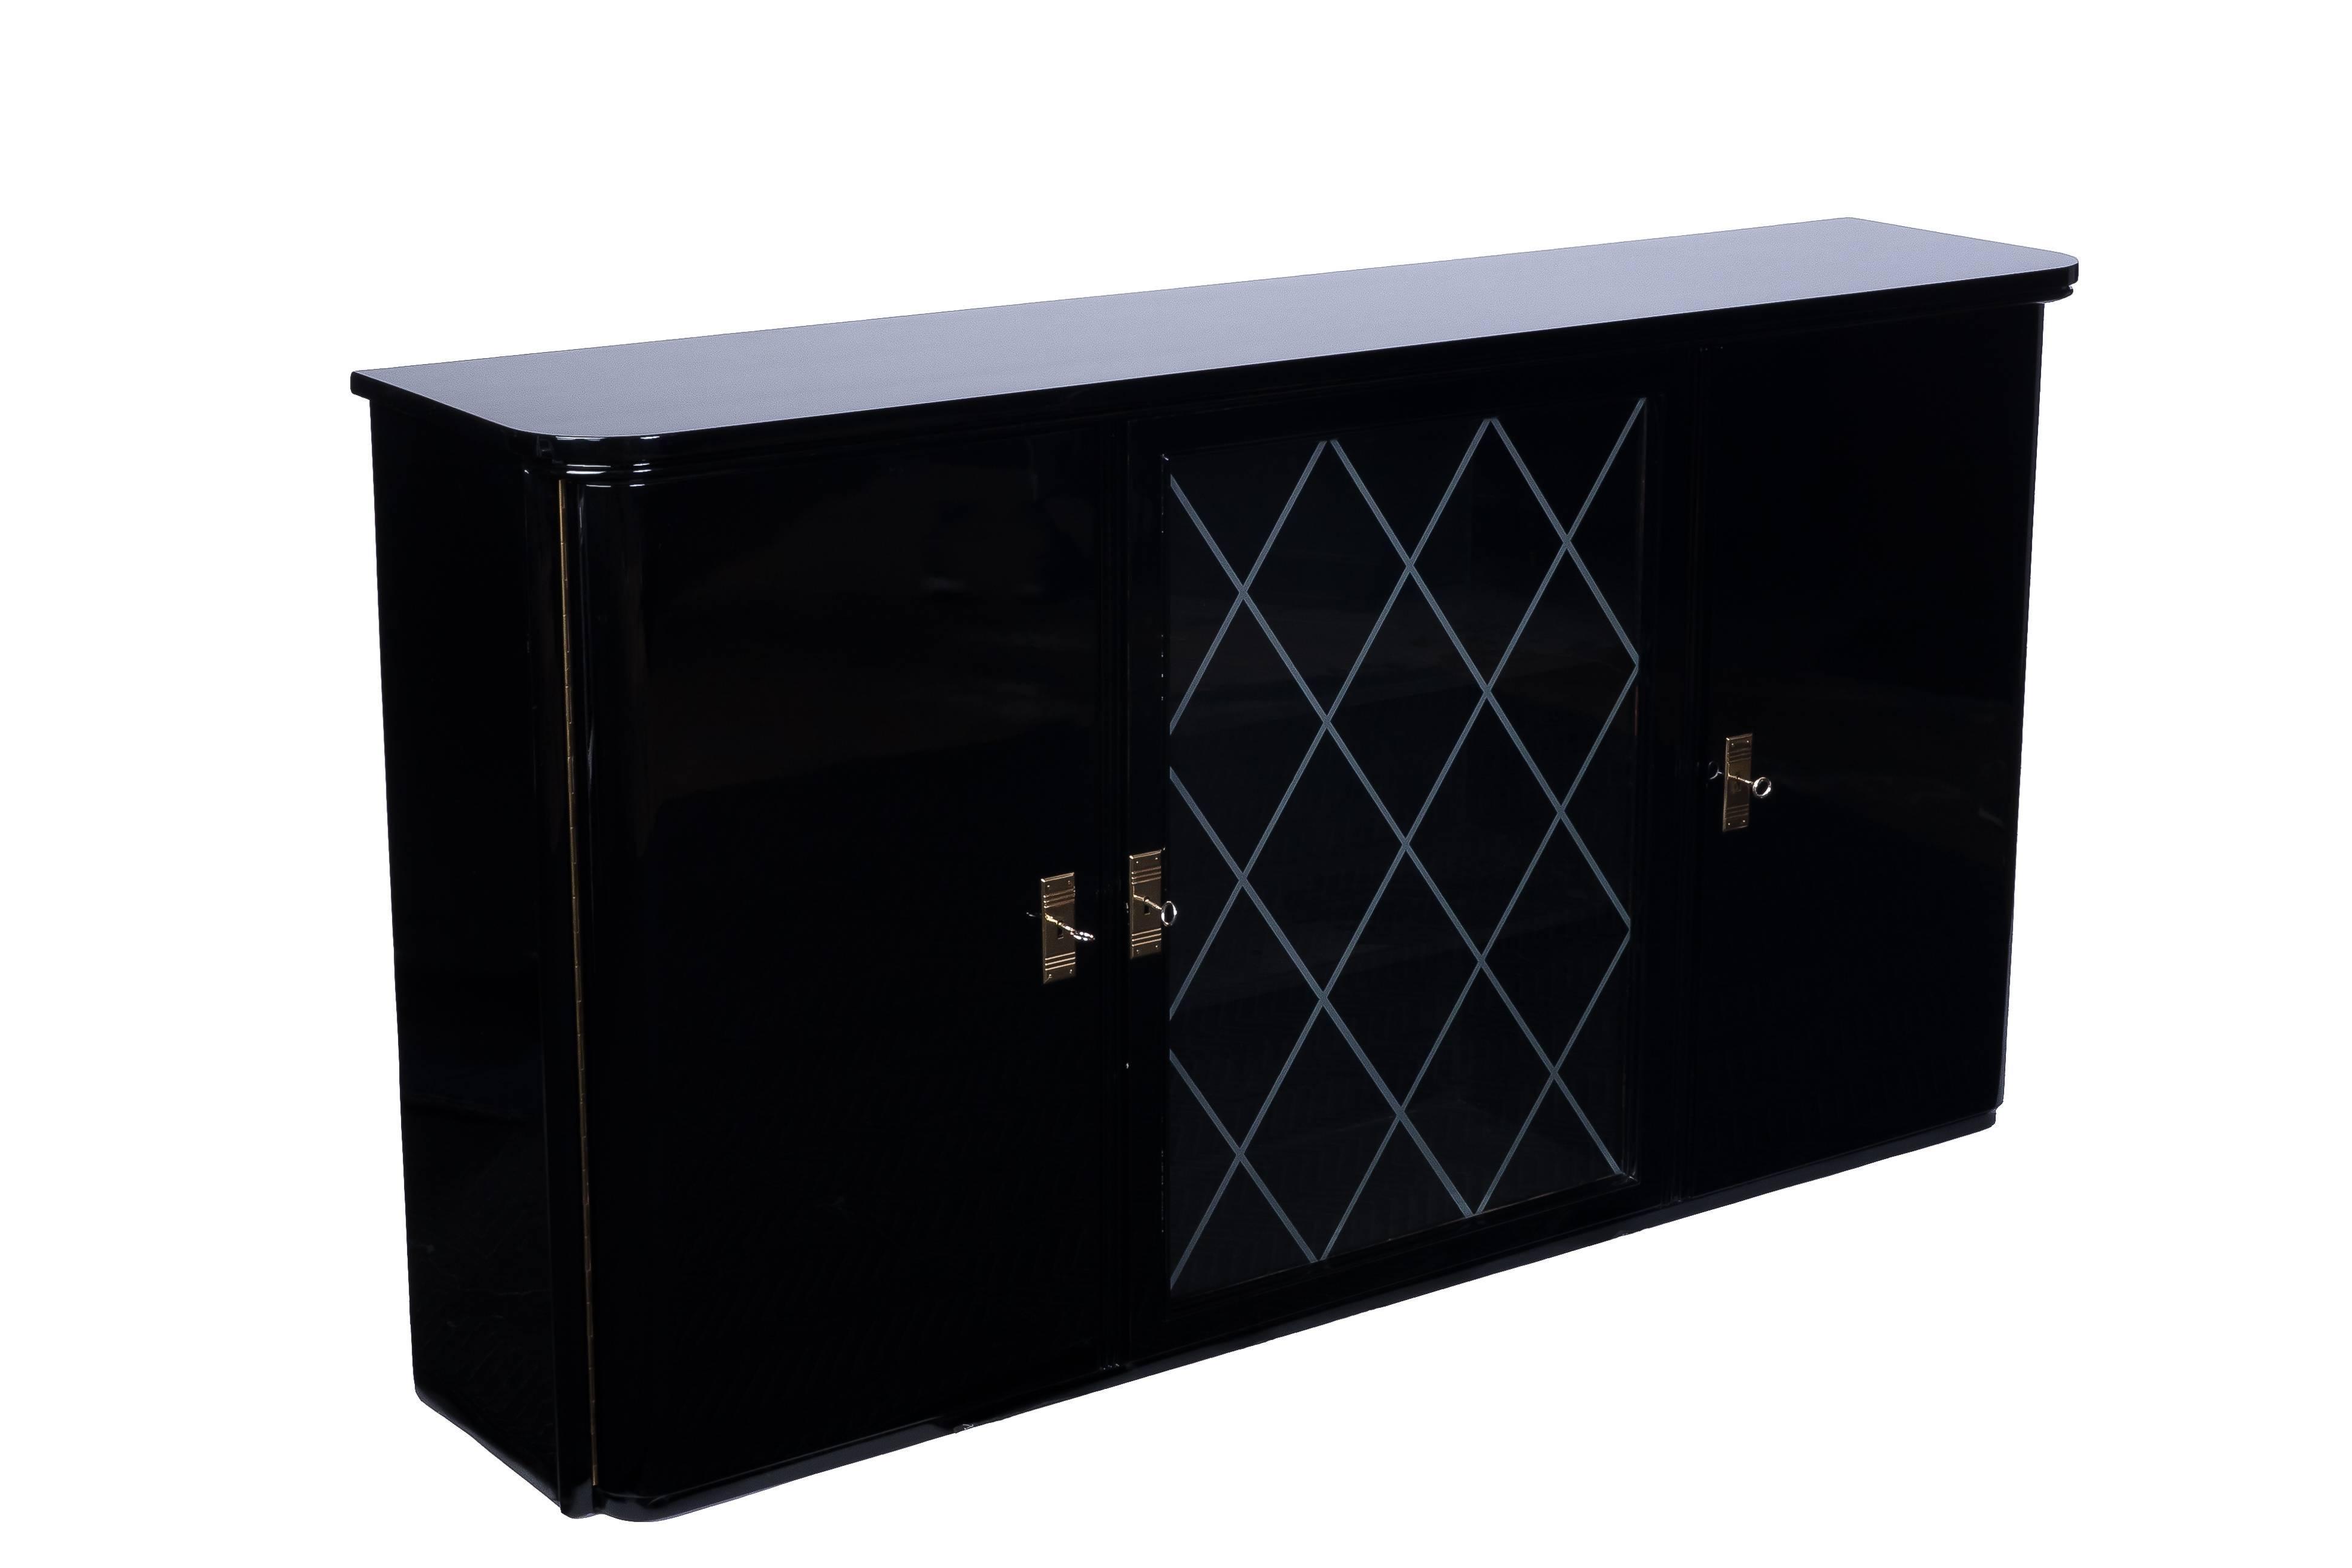 This gorgeous Art Deco high board features a rectangular form design with brass fittings finished in a beautiful high gloss black lacquer. The piece has two swing doors and a center etched glass door for display. Three drawers and shelves for plenty